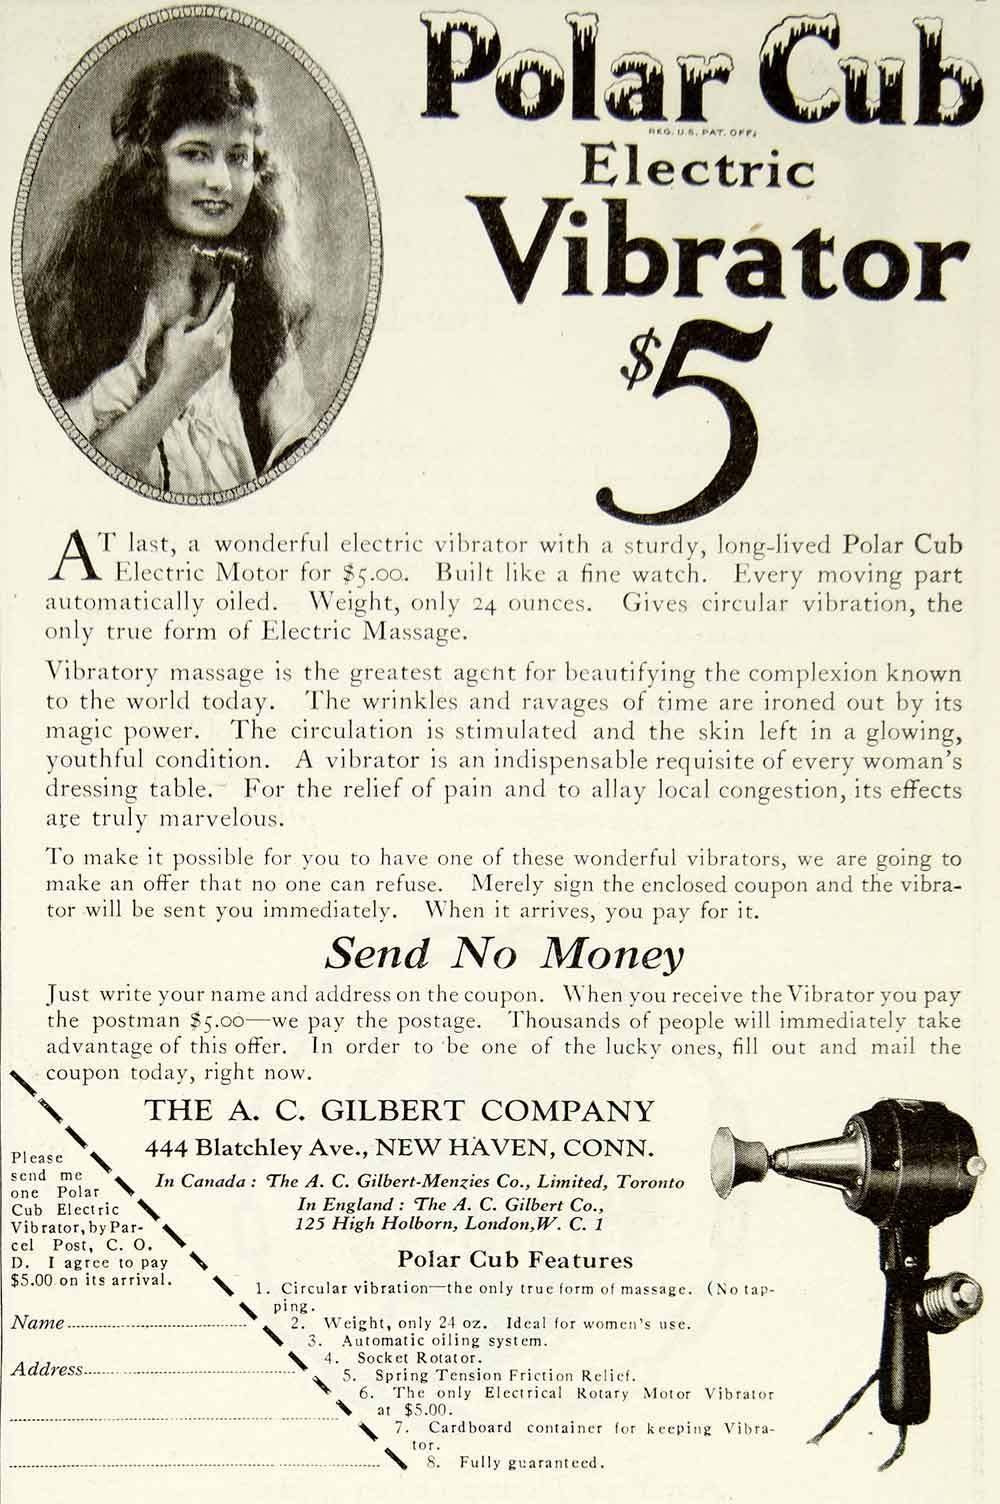 11 Vintage Vibrator Ads To Make You Glad You Live In 2015 Autostraddle